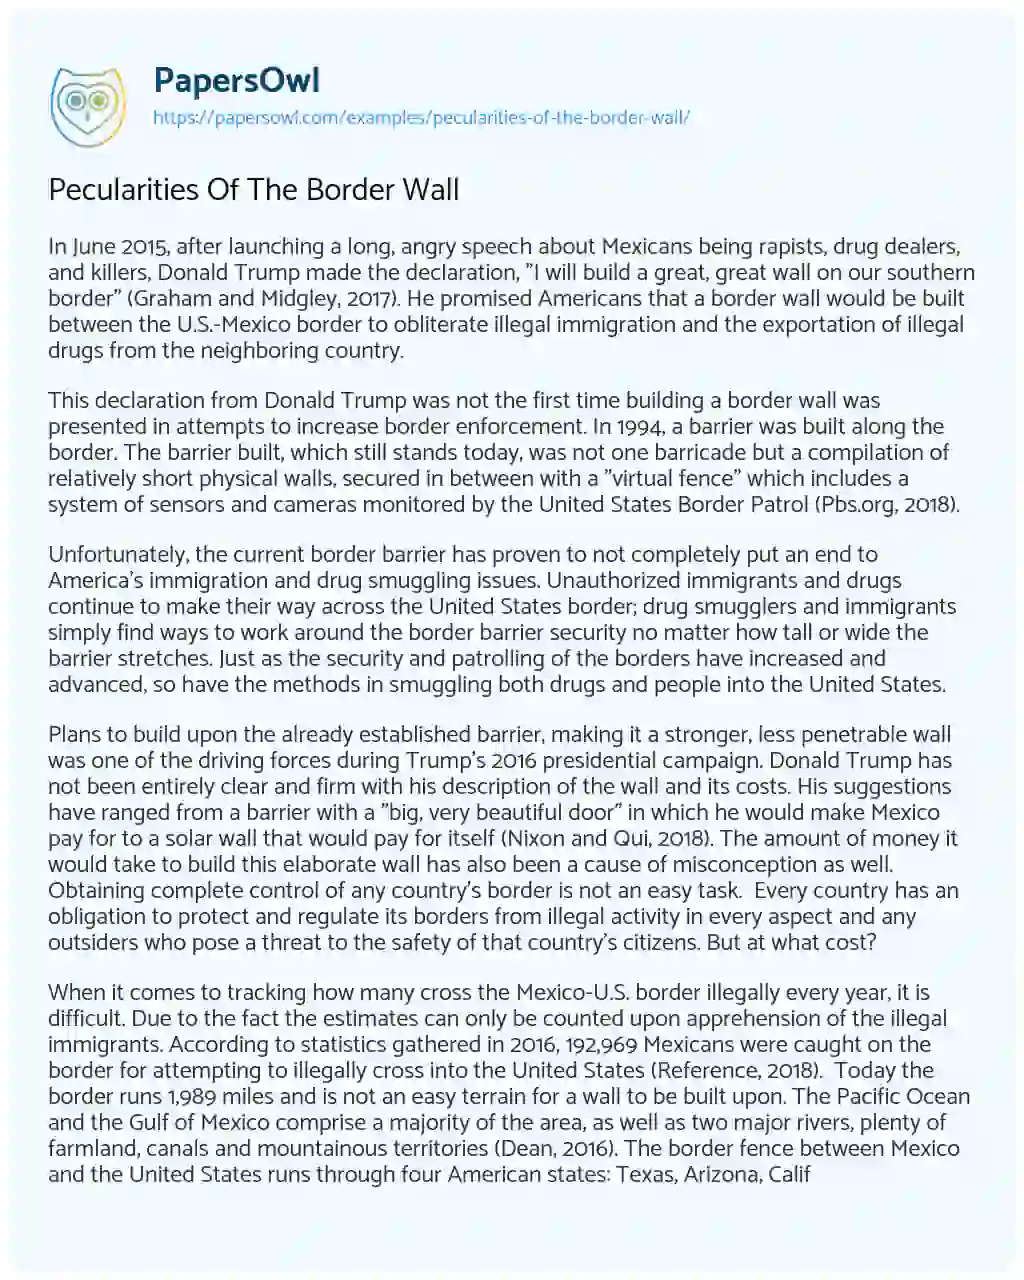 Essay on Pecularities of the Border Wall